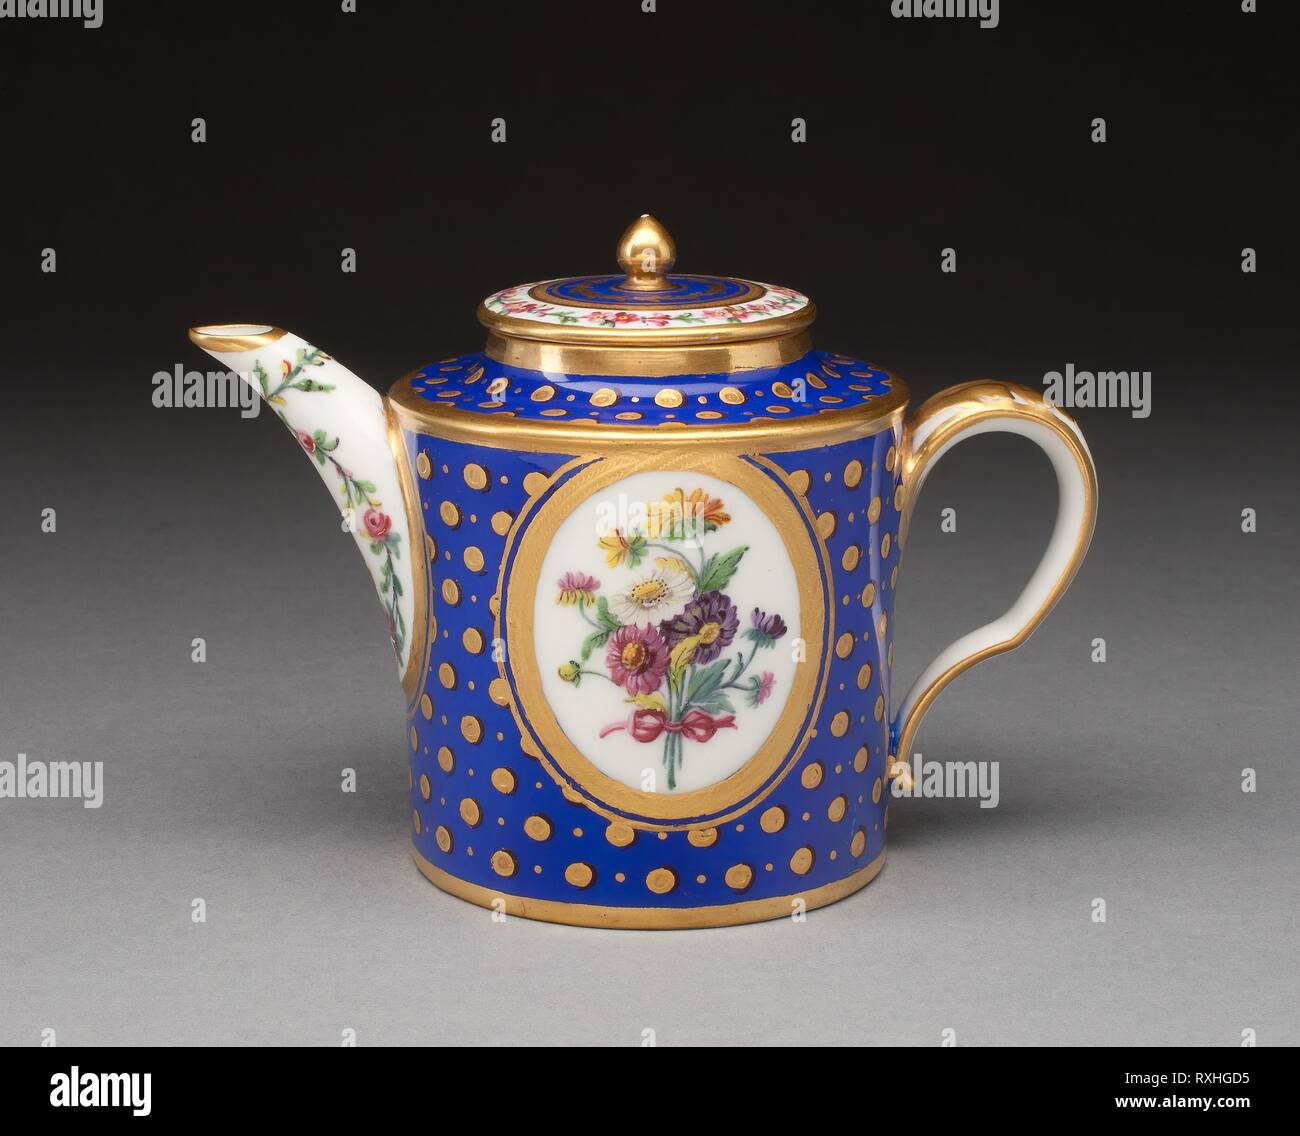 Teapot. Sèvres Porcelain Manufactory; French, founded 1740; Painting  attributed by Buteux (French, 18th century). Date: 1788. Dimensions: 10.2 x  14 x 7.6 cm (4 x 5 1/2 x 3 in.). Soft-paste porcelain